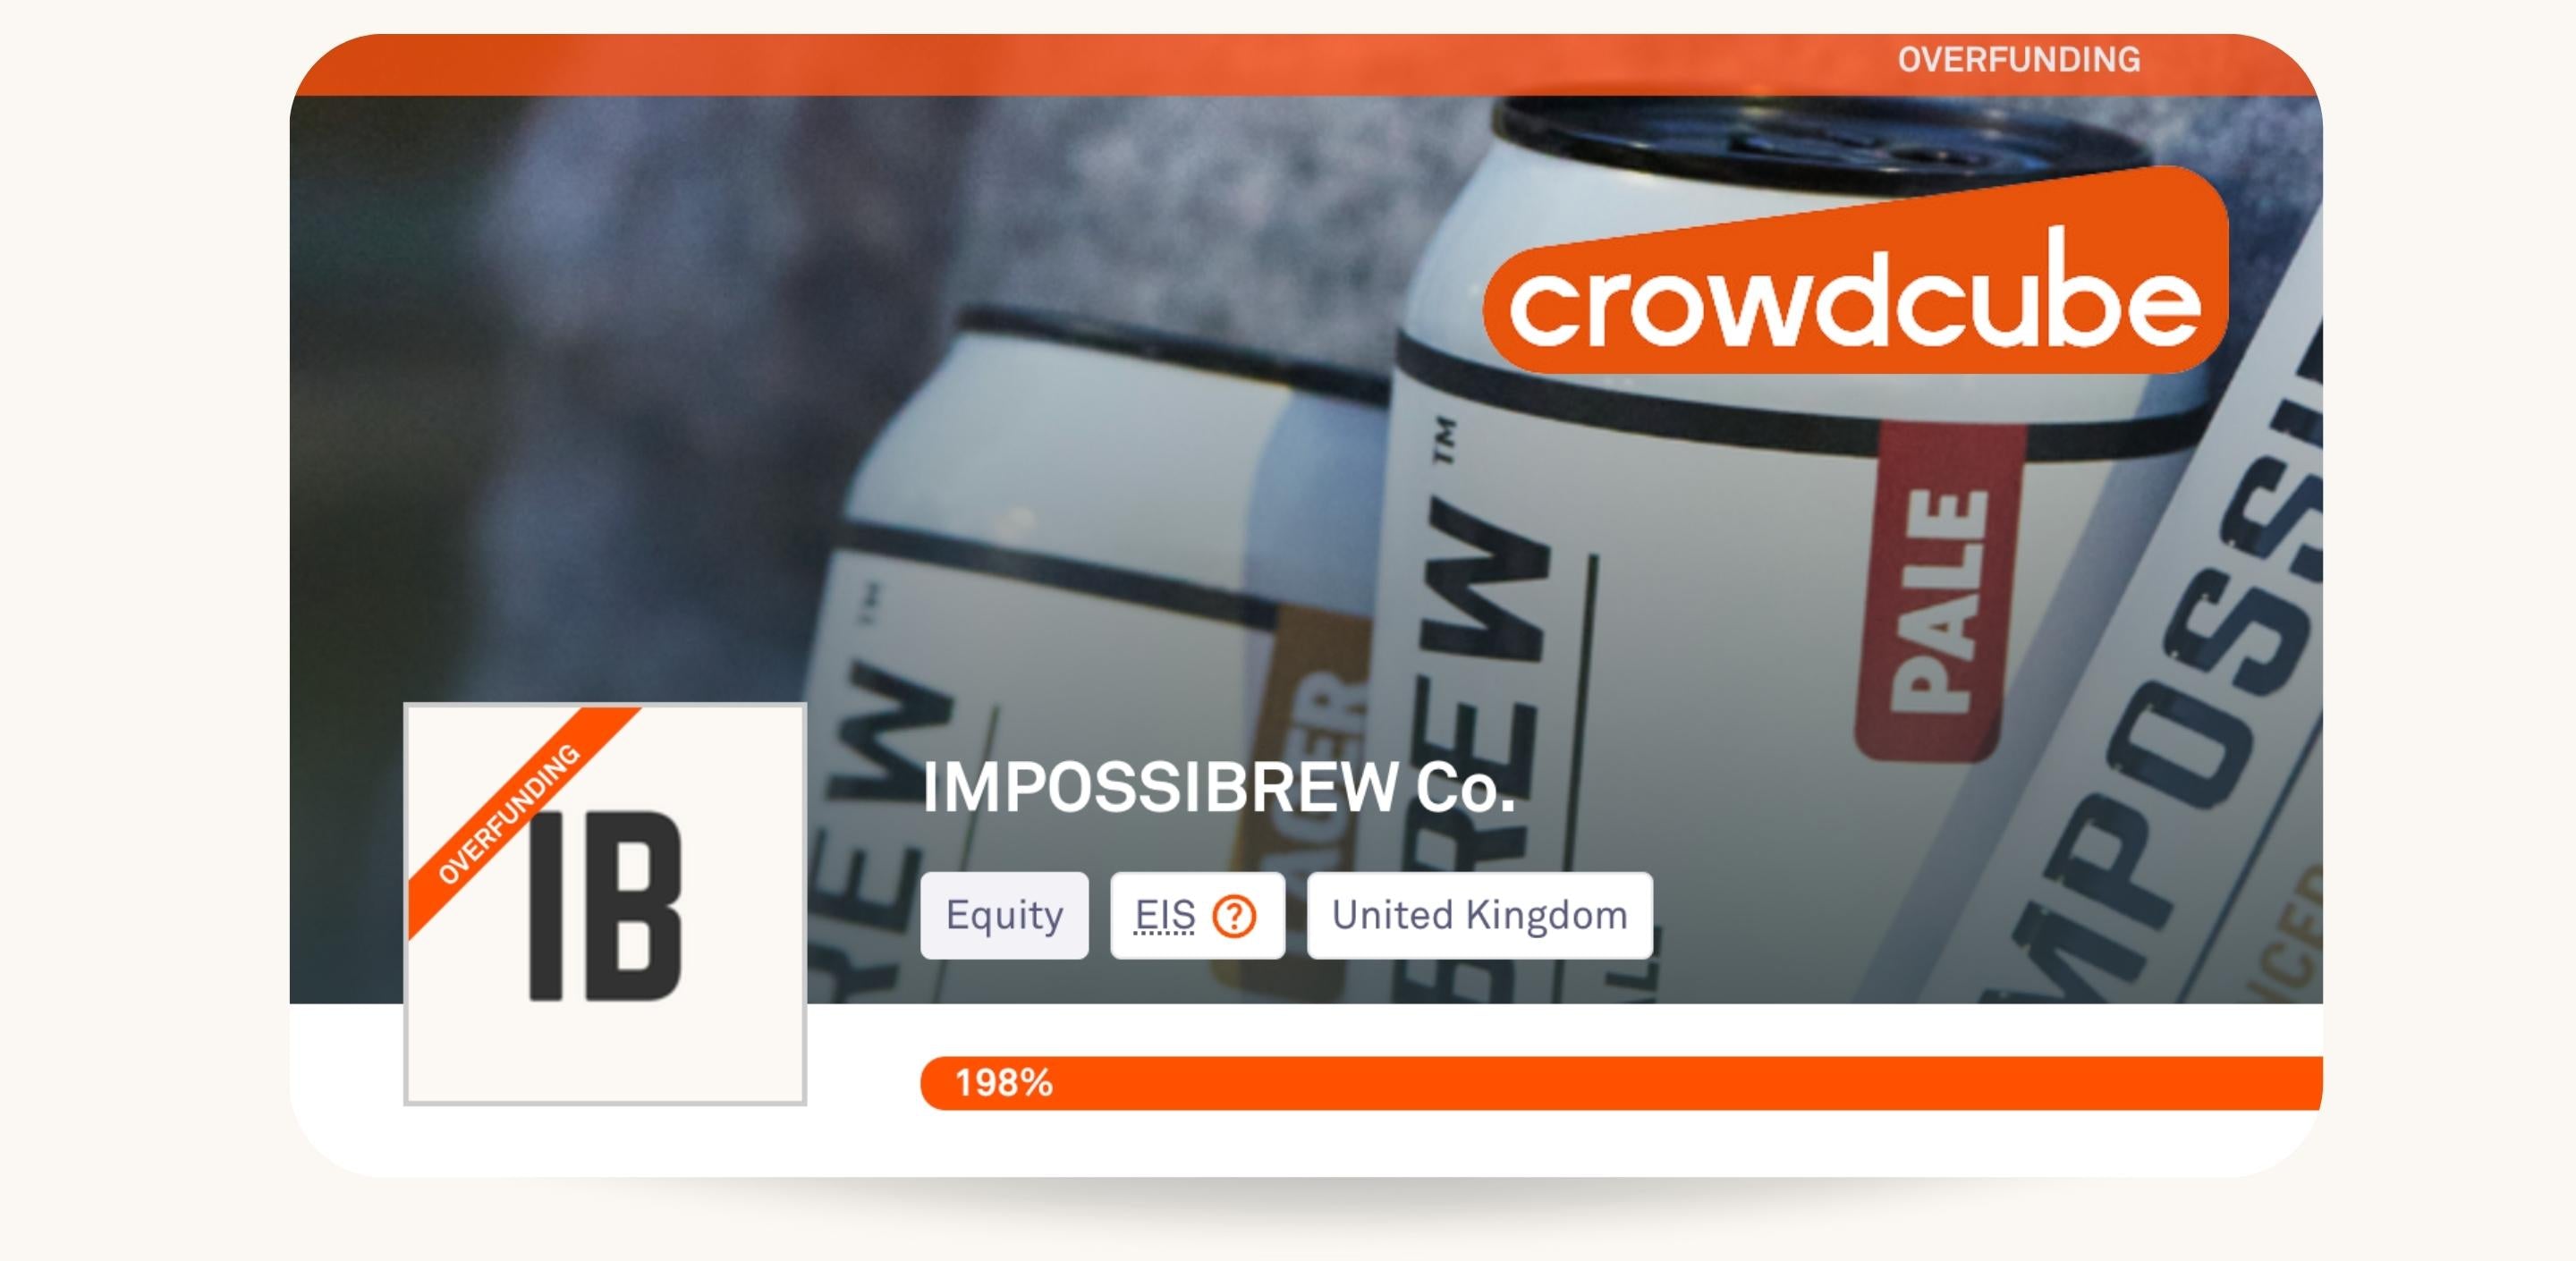 IMPOSSIBREW® Raises 6-figure Crowdfunding Campaign, Achieves Funding Target in Under 10 mins.